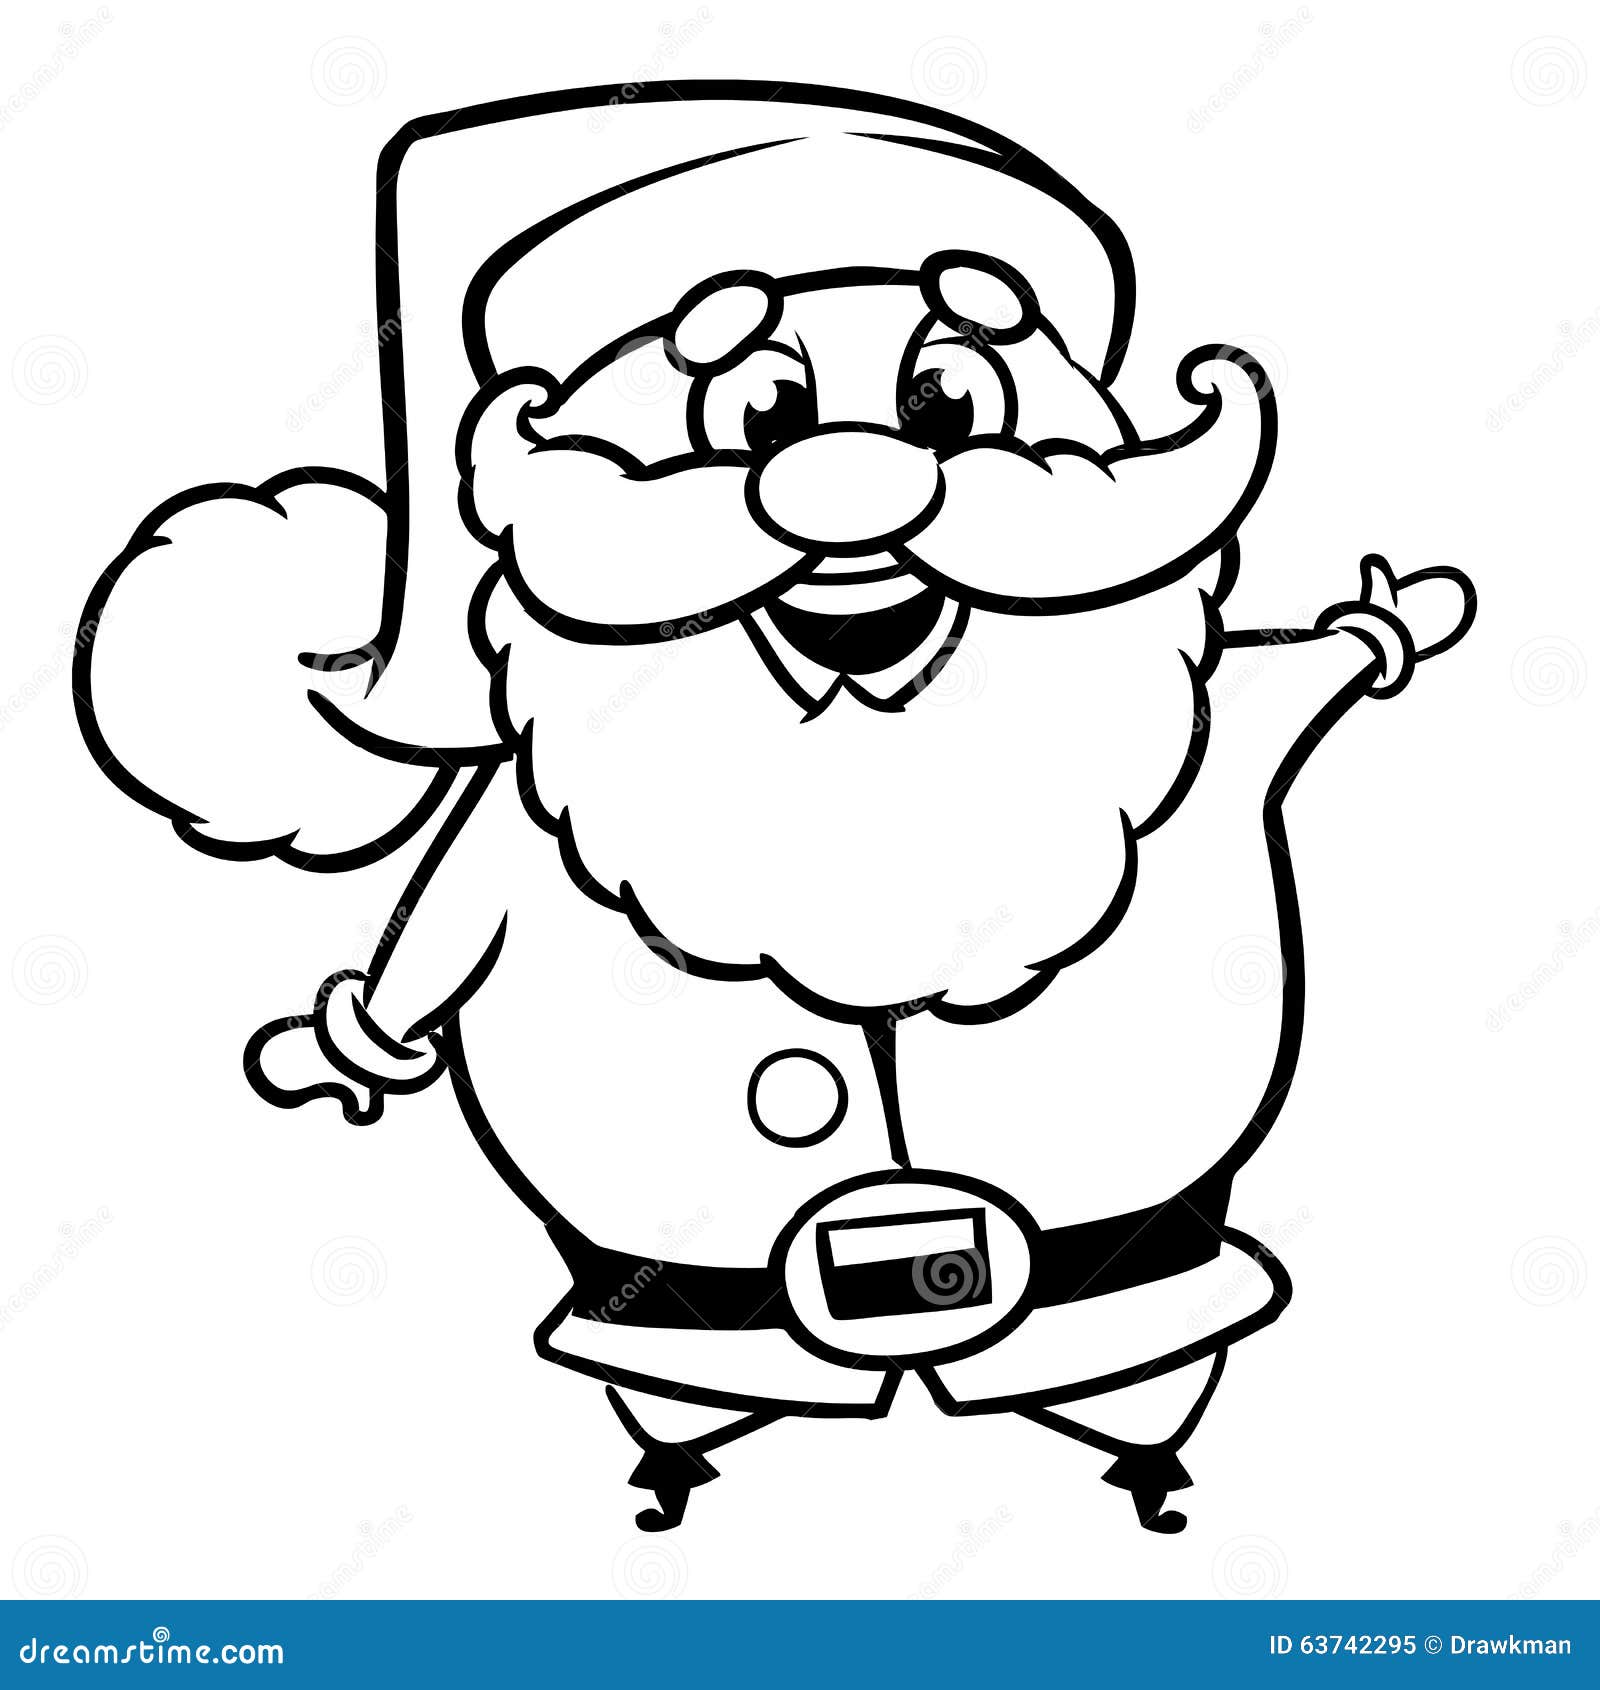 Outline Of A Santa Claus Christmas Character Line Art Stock